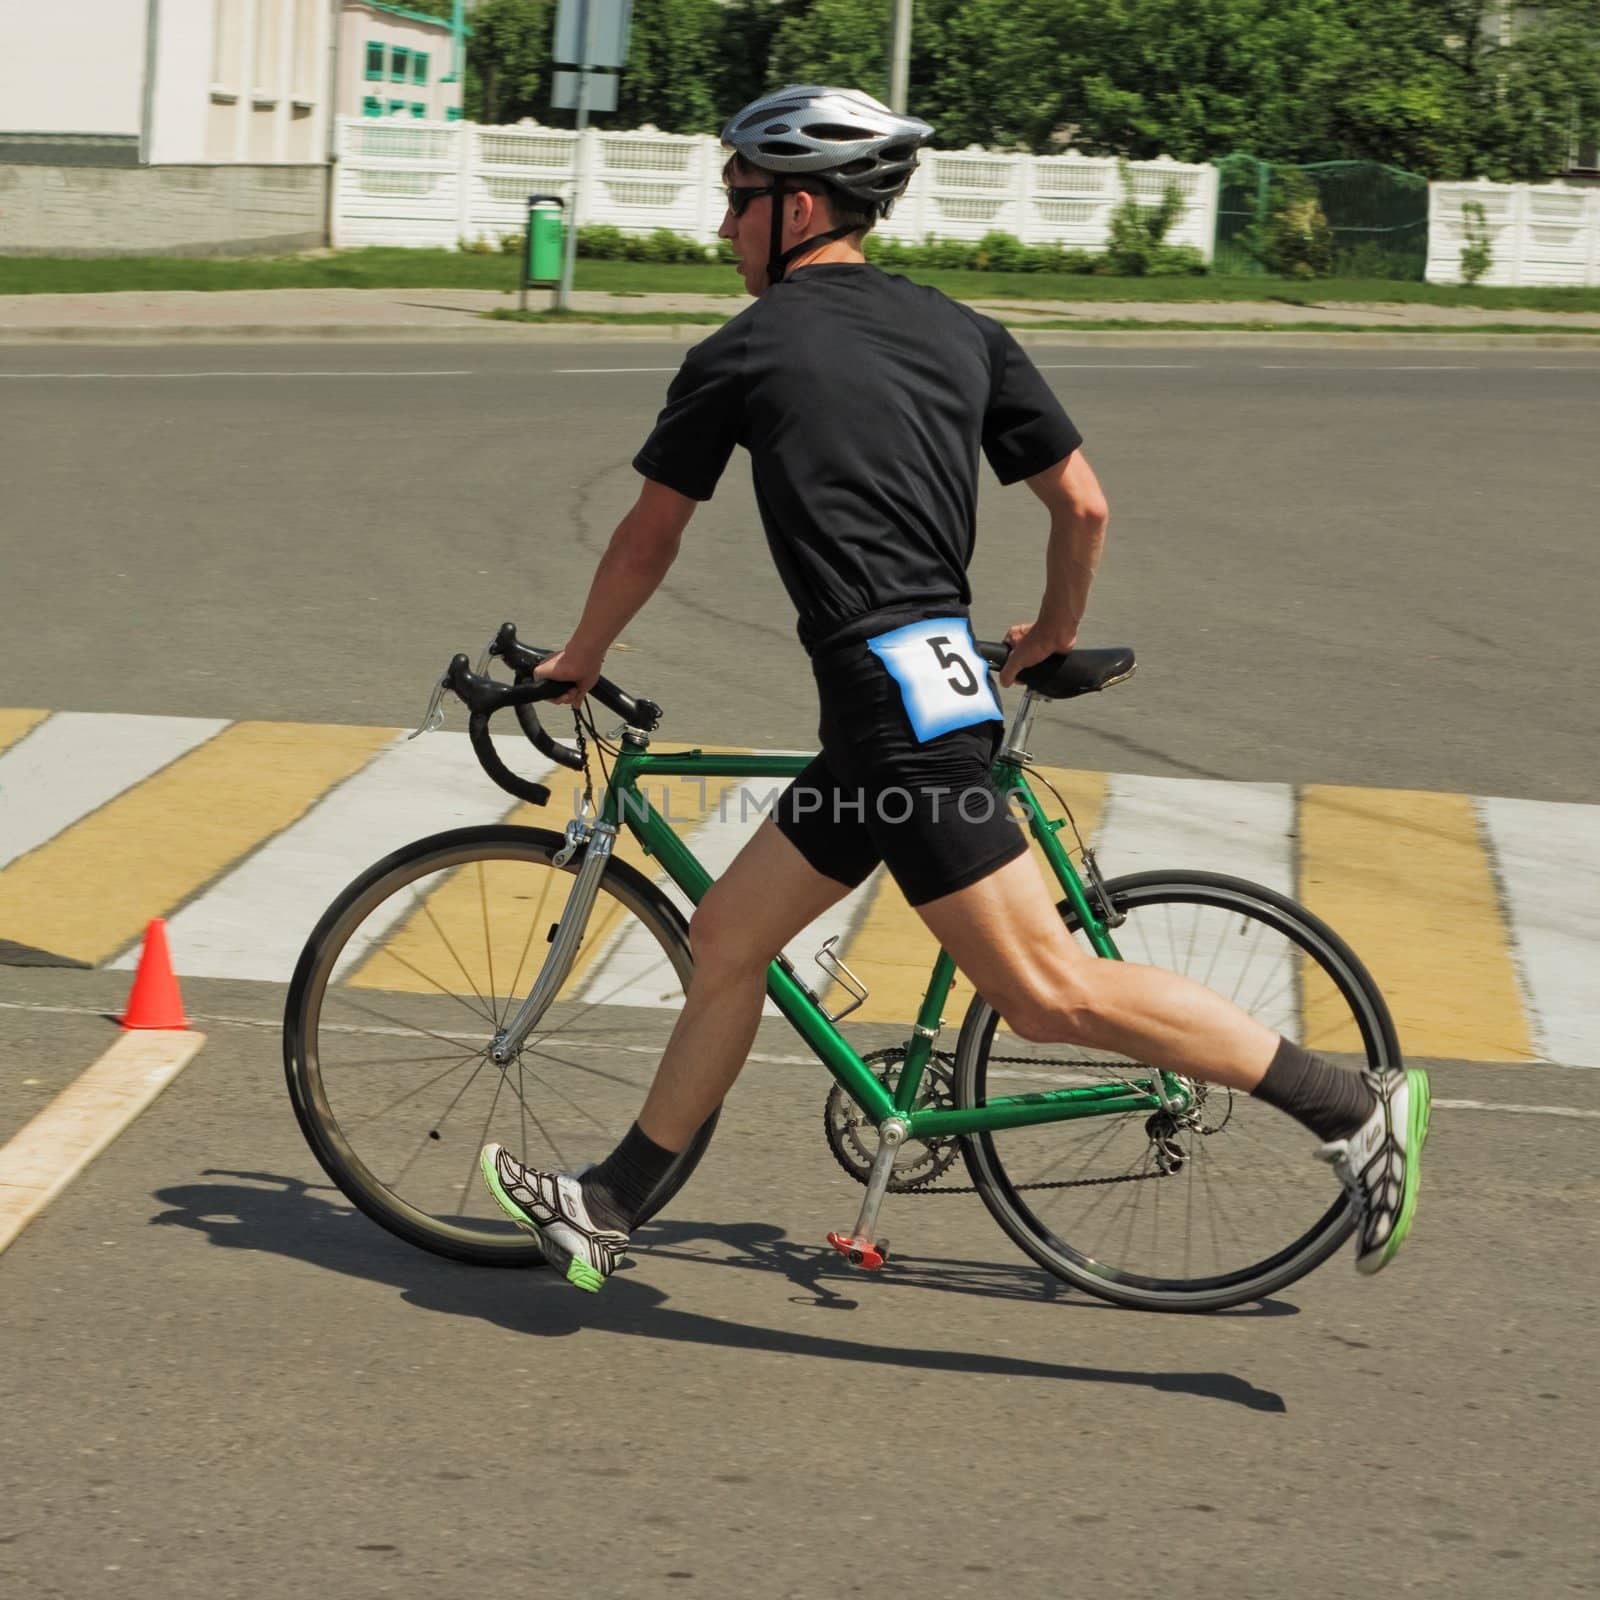 The sportsman running near  bicycle on road